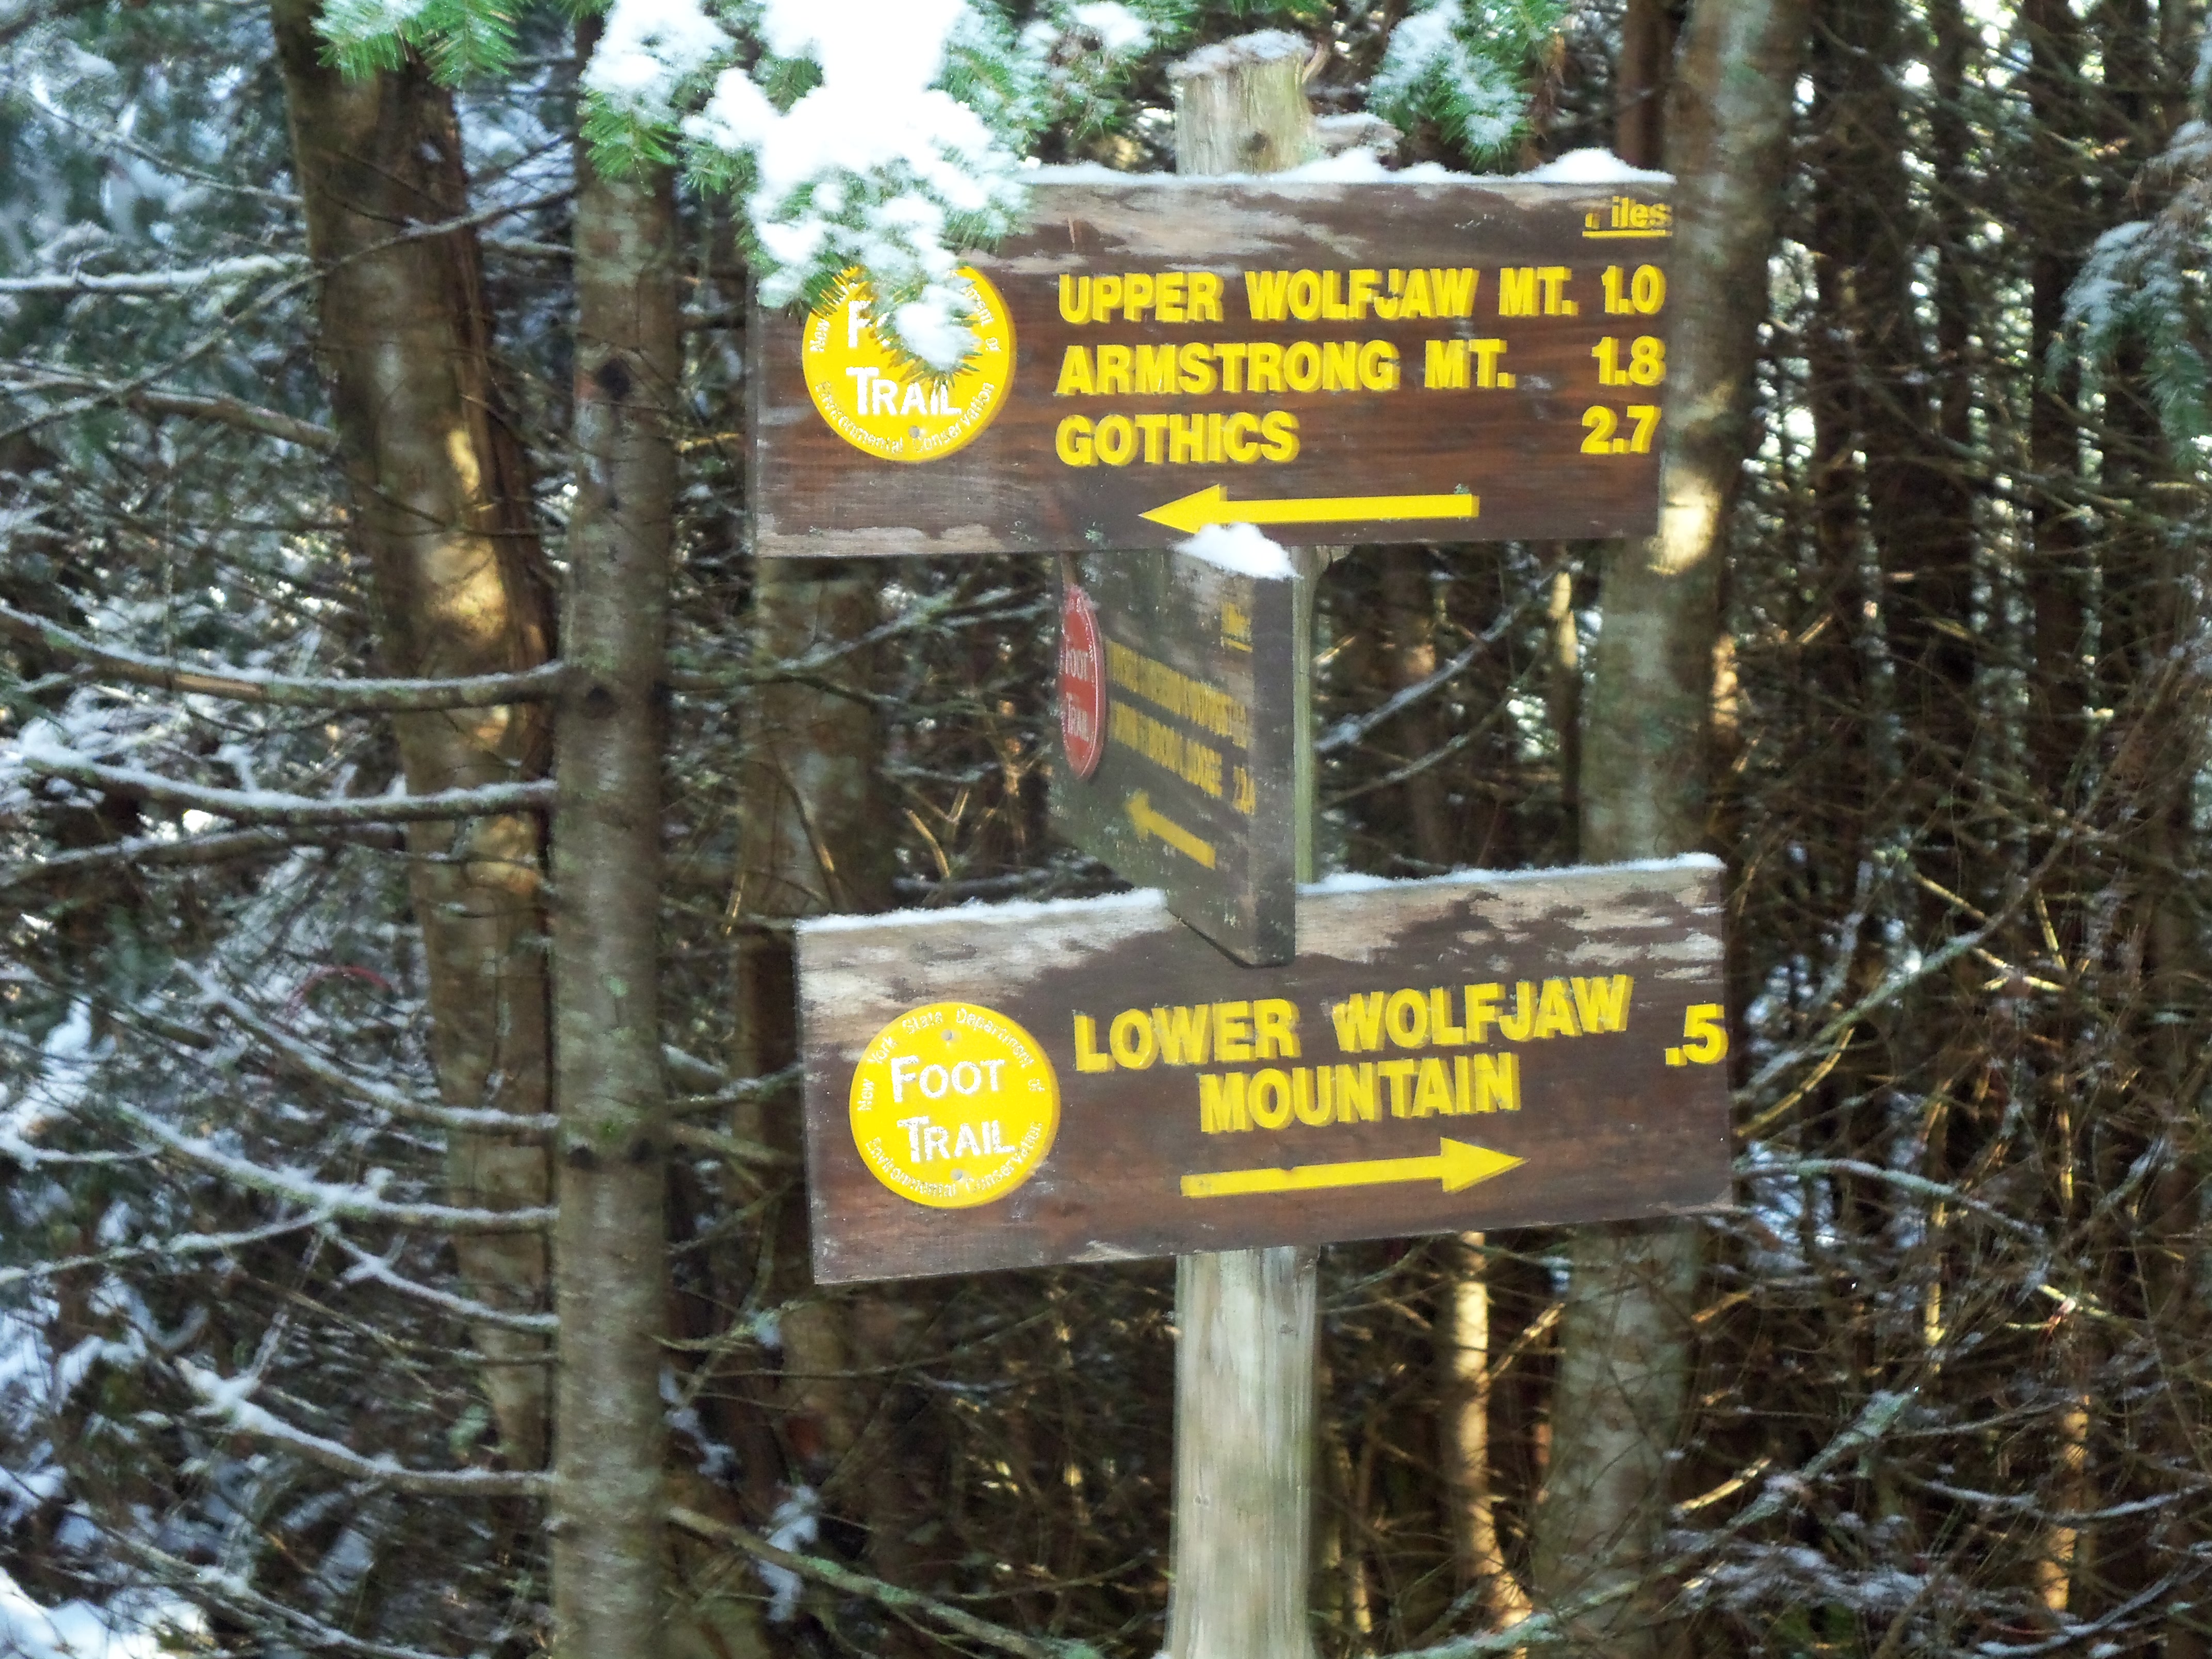 Upper and Lower Wolfjaws trail junction